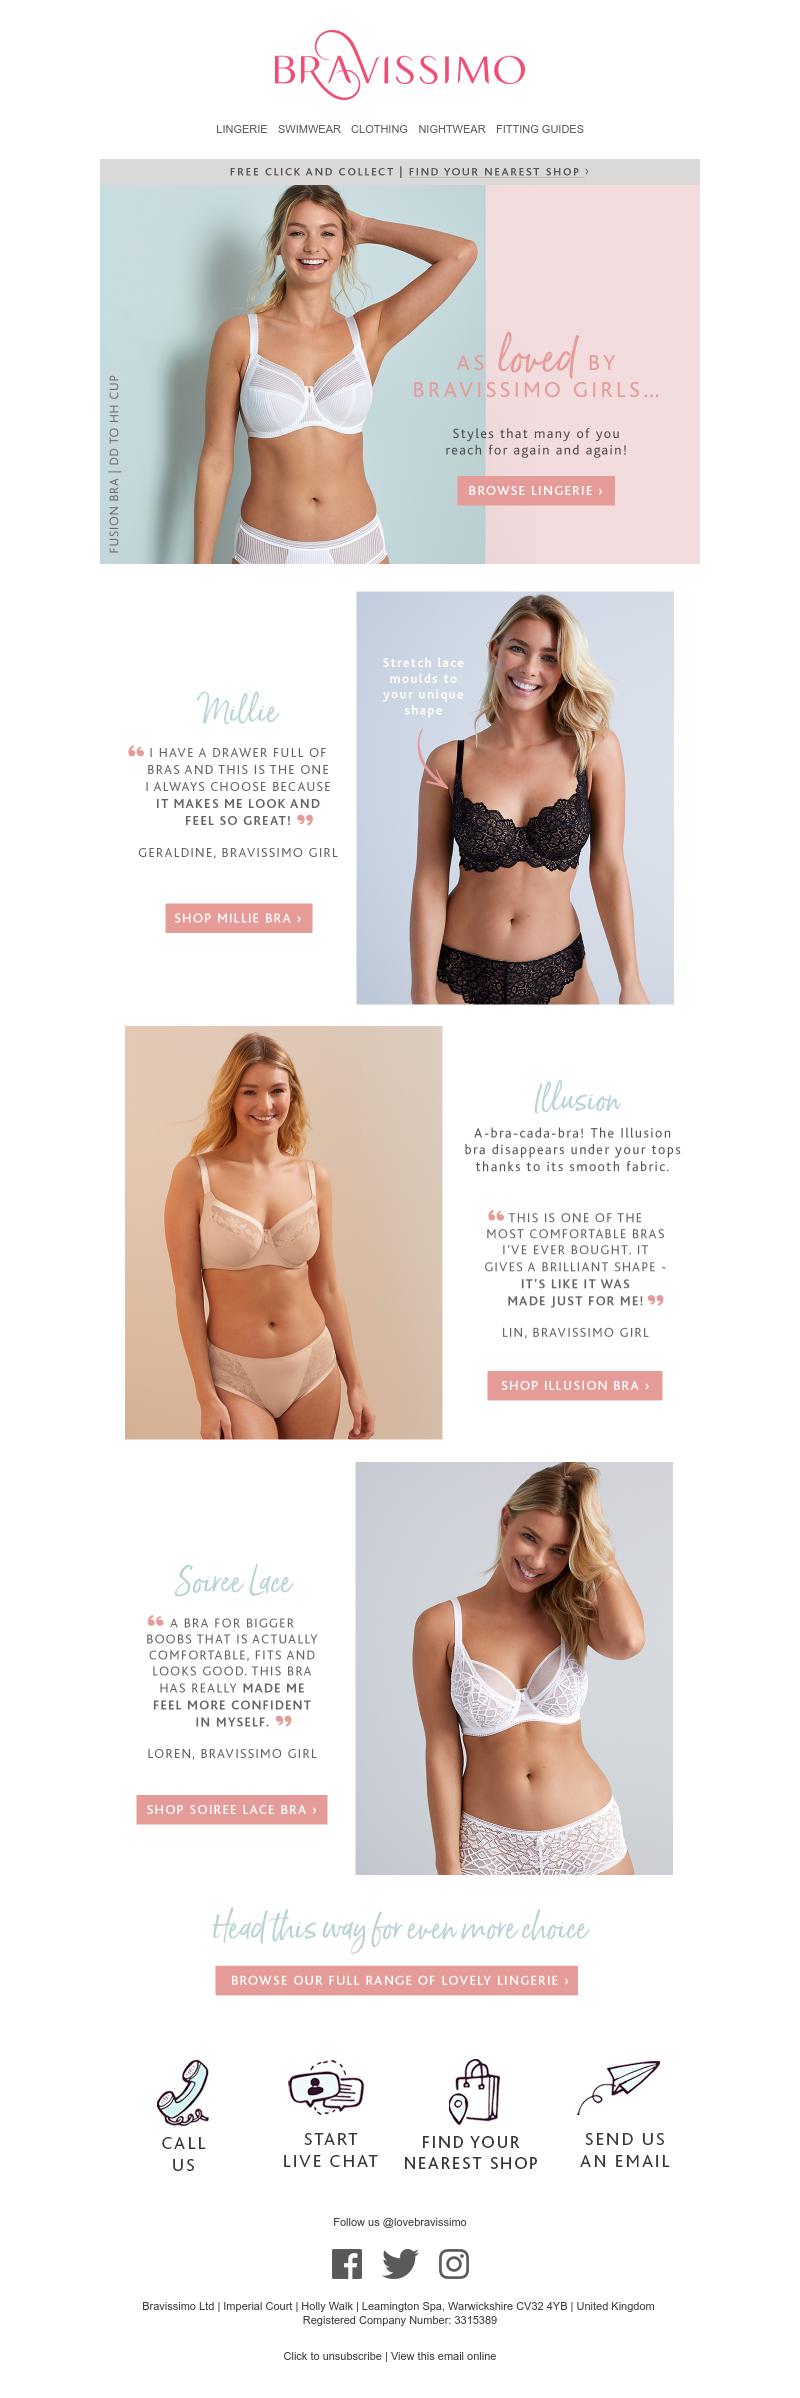 Email sent from Bravissimo to a Newsletter subscriber